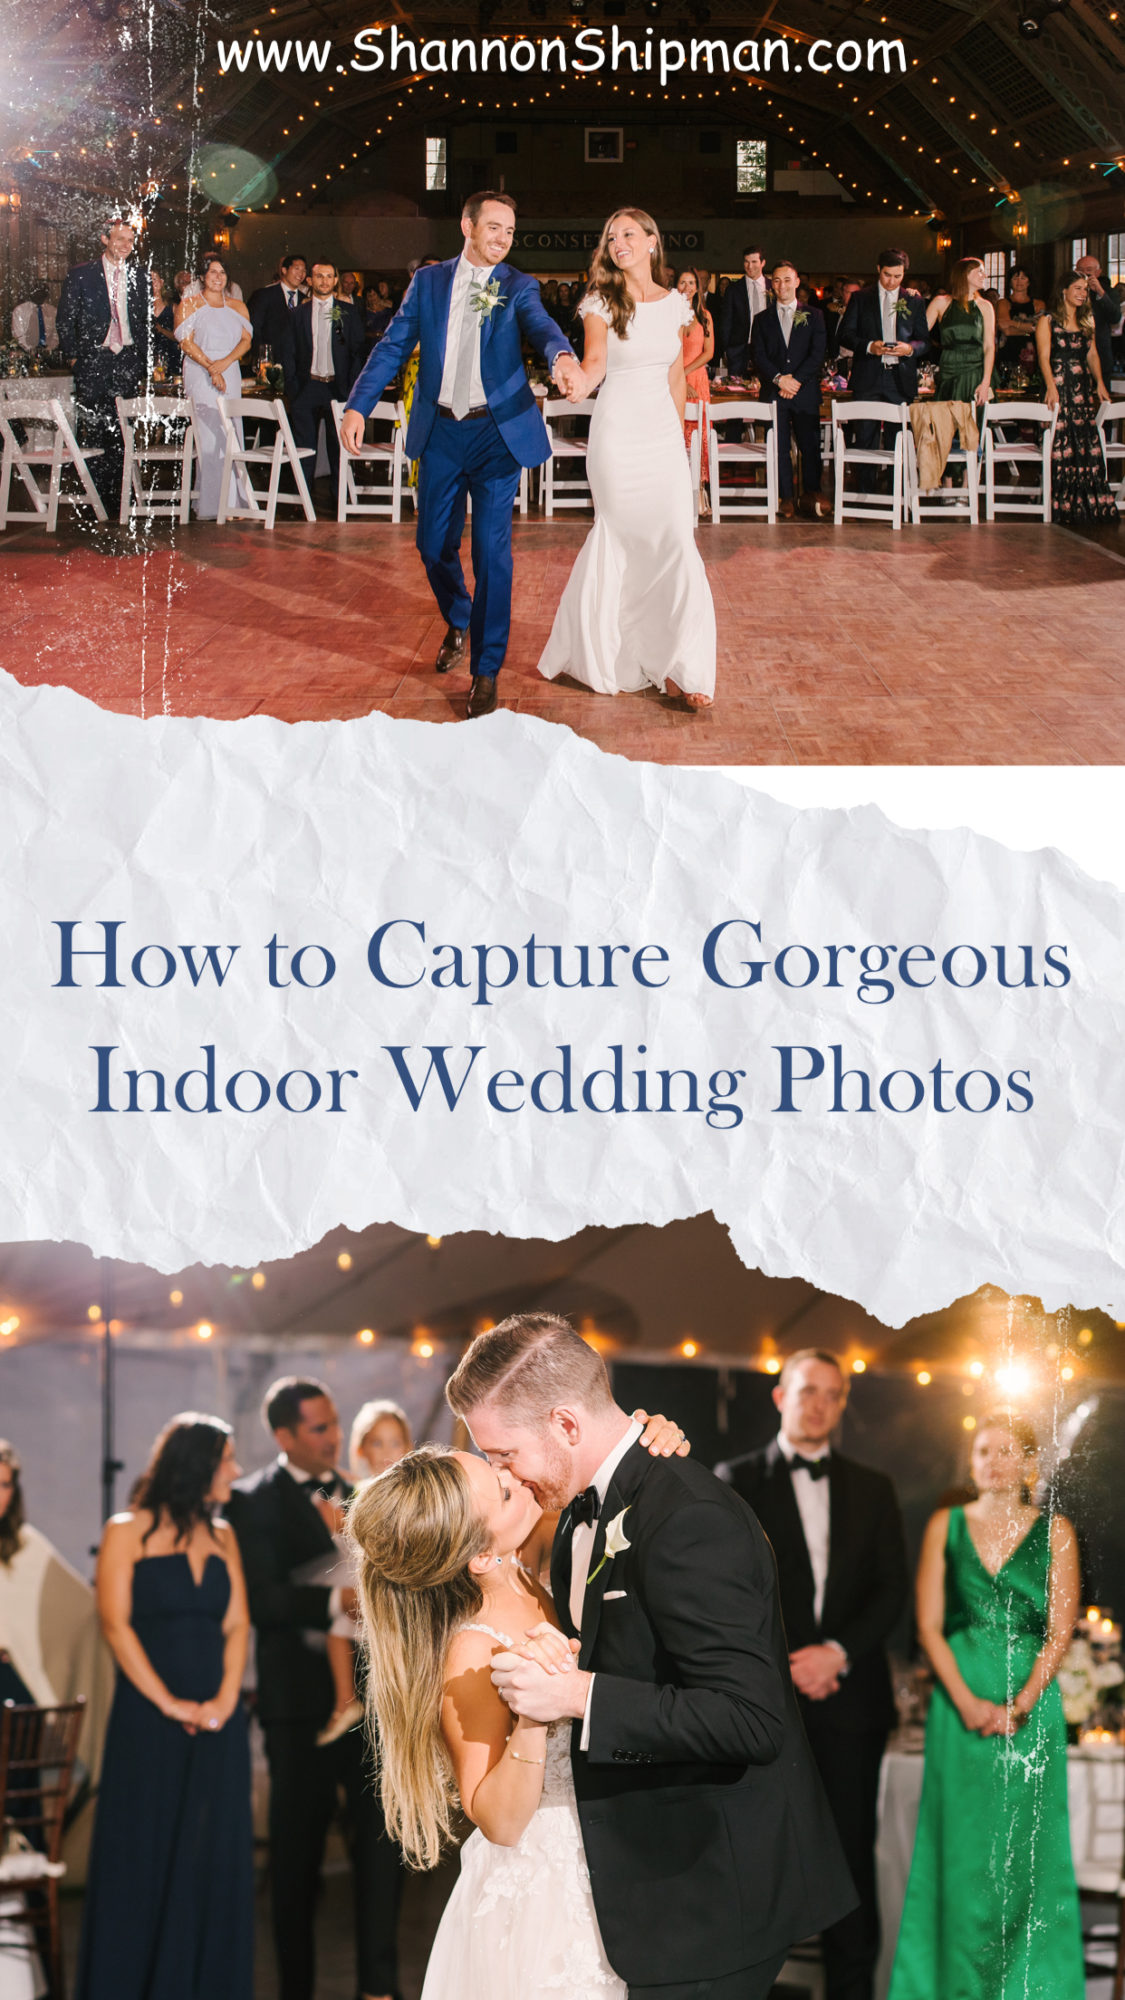 Wedding Photography Tips: How to Take Gorgeous Indoor Wedding Photos by popular New England photographer, Shannon Shipman: Pinterest image of how to capture gorgeous indoor wedding photos. 